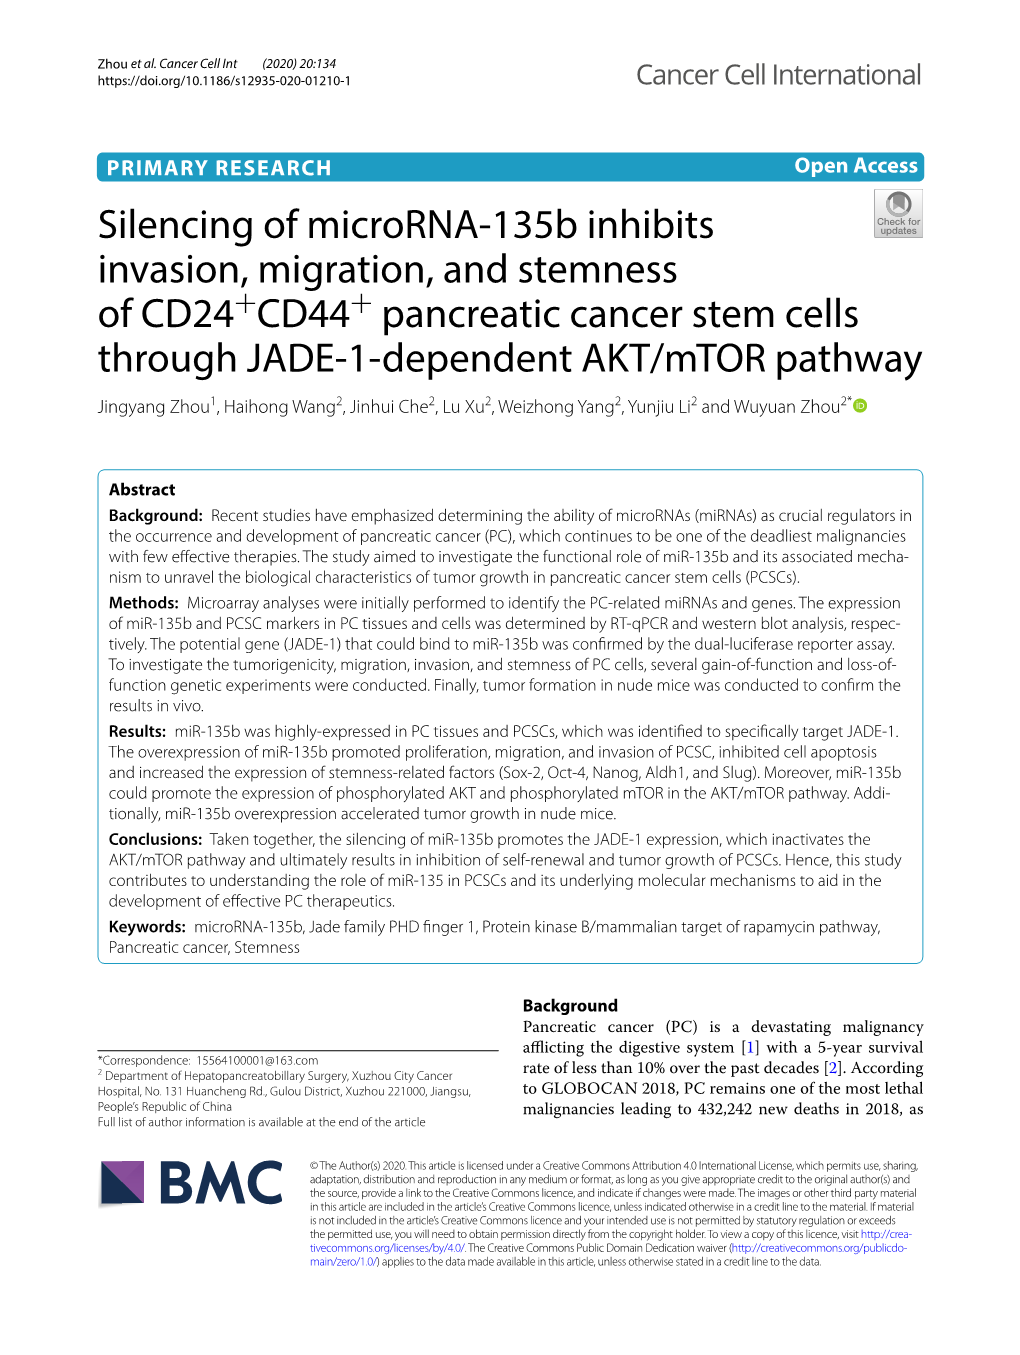 Silencing of Microrna-135B Inhibits Invasion